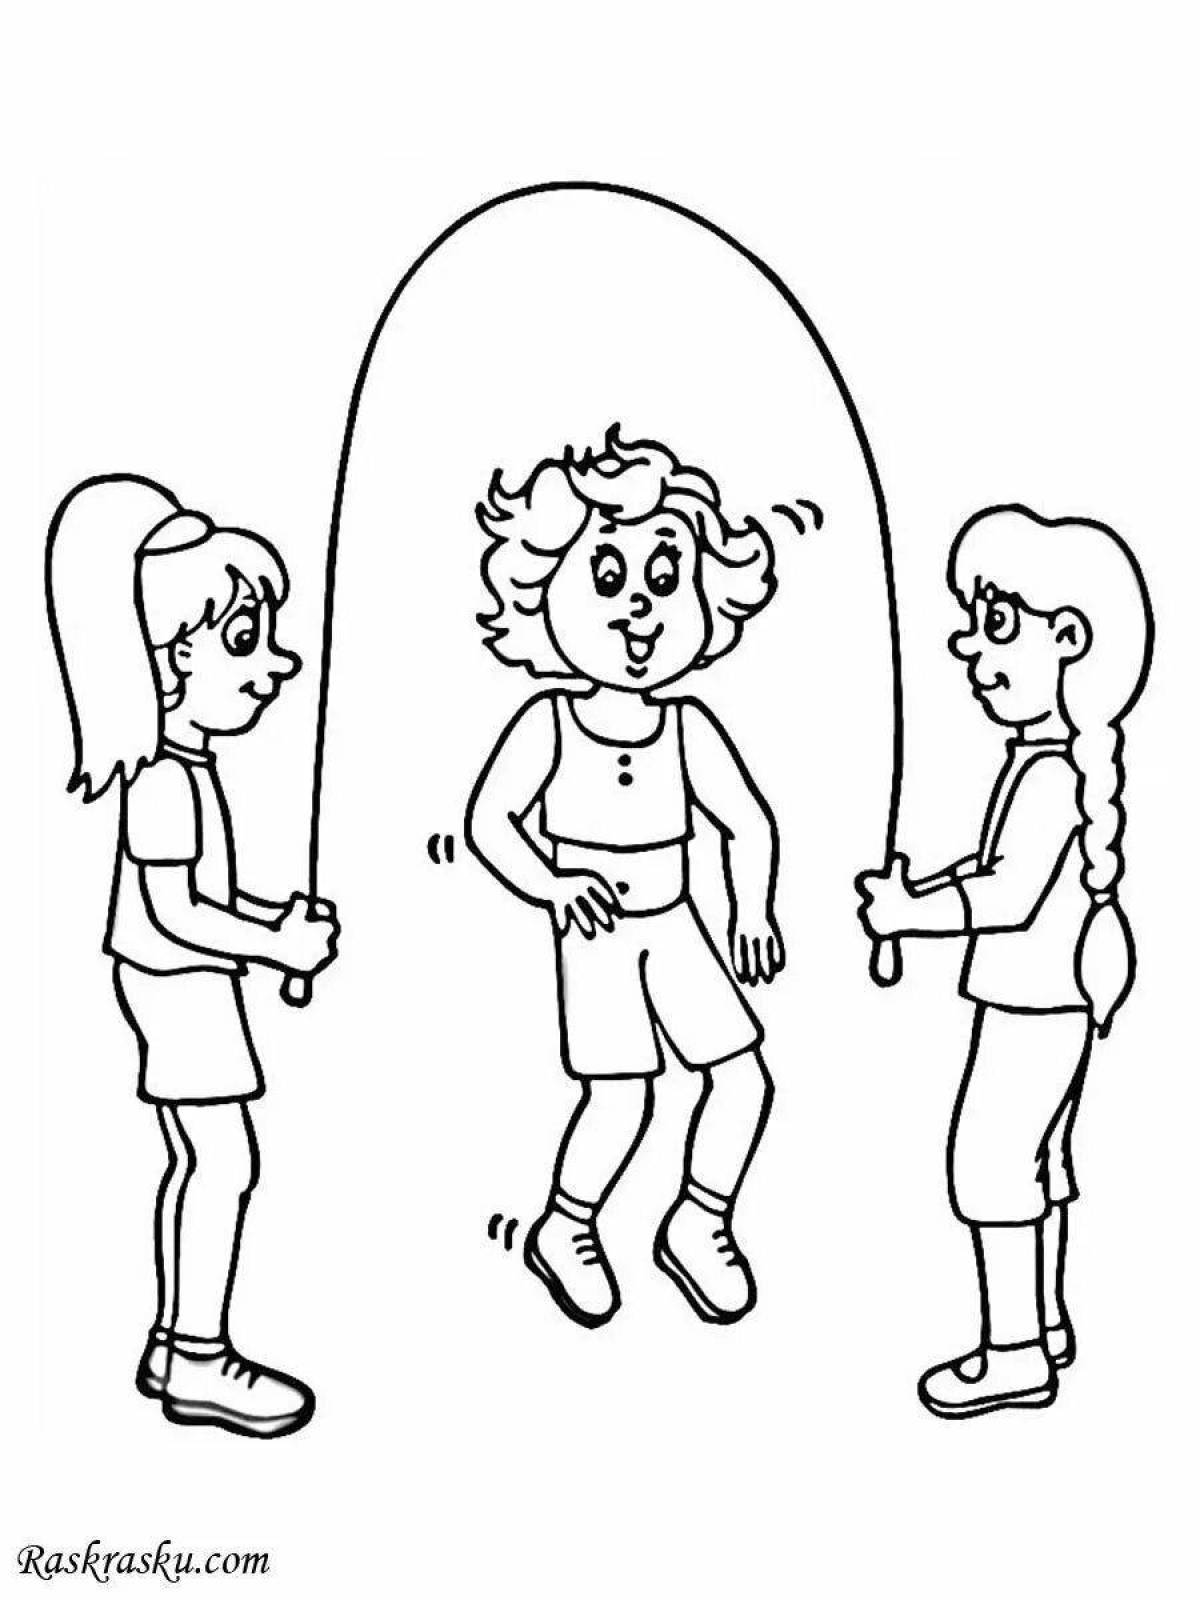 Color frenzy coloring page kids com